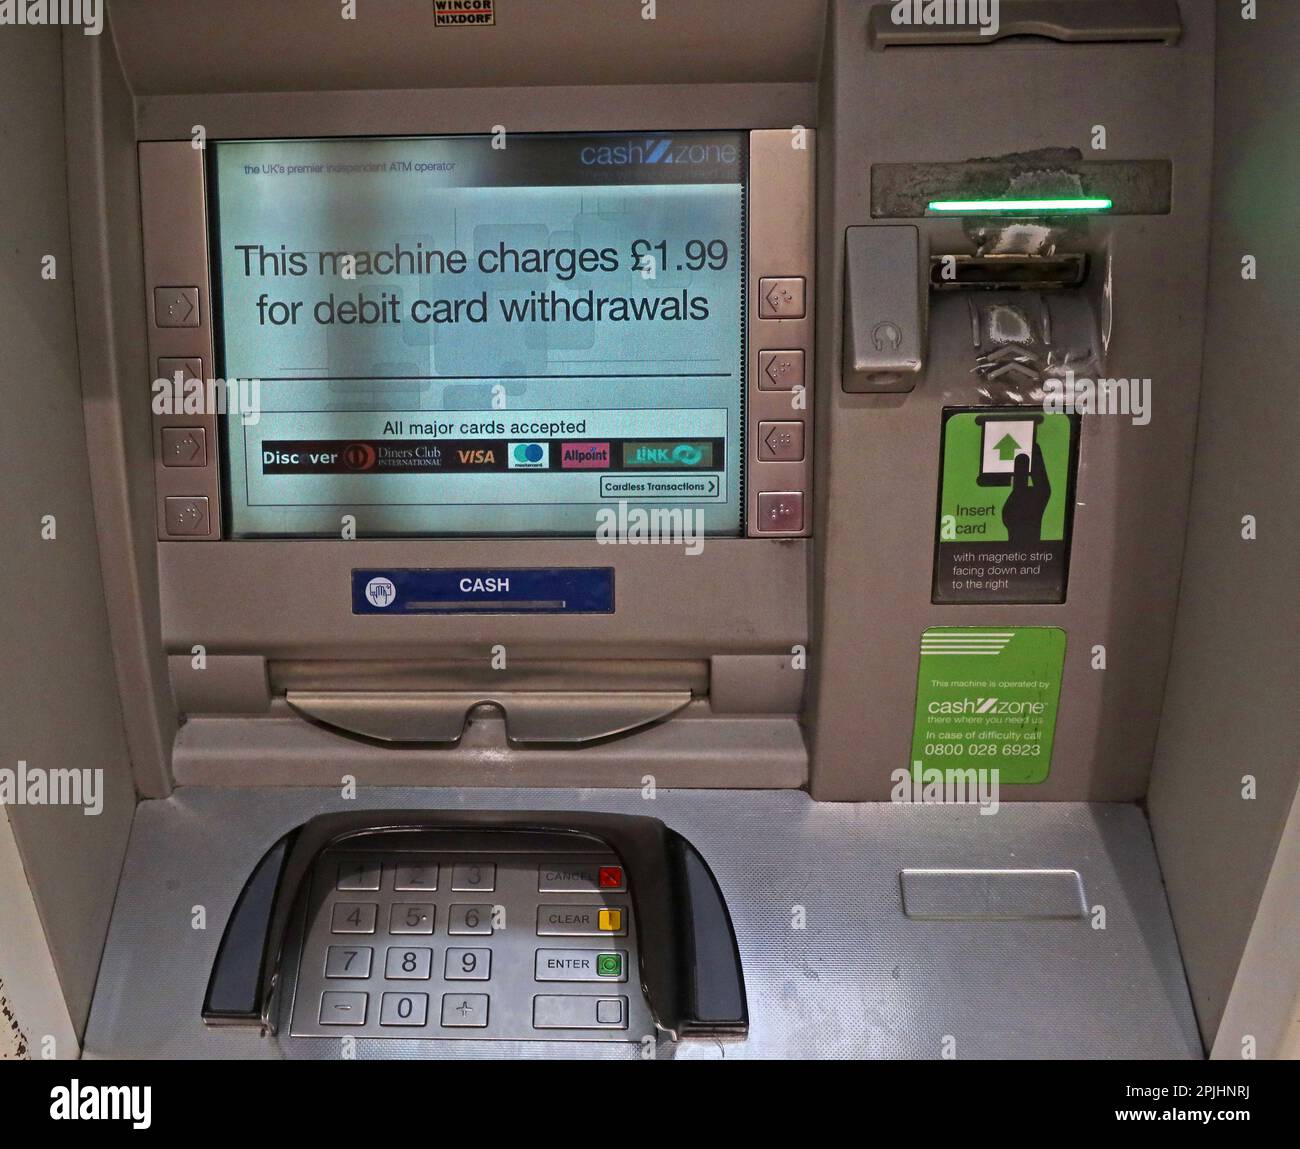 Cashzone ATM - cash machine - Automated Teller Machine - Charging £1.99 to withdraw cash in a UK city centre Stock Photo